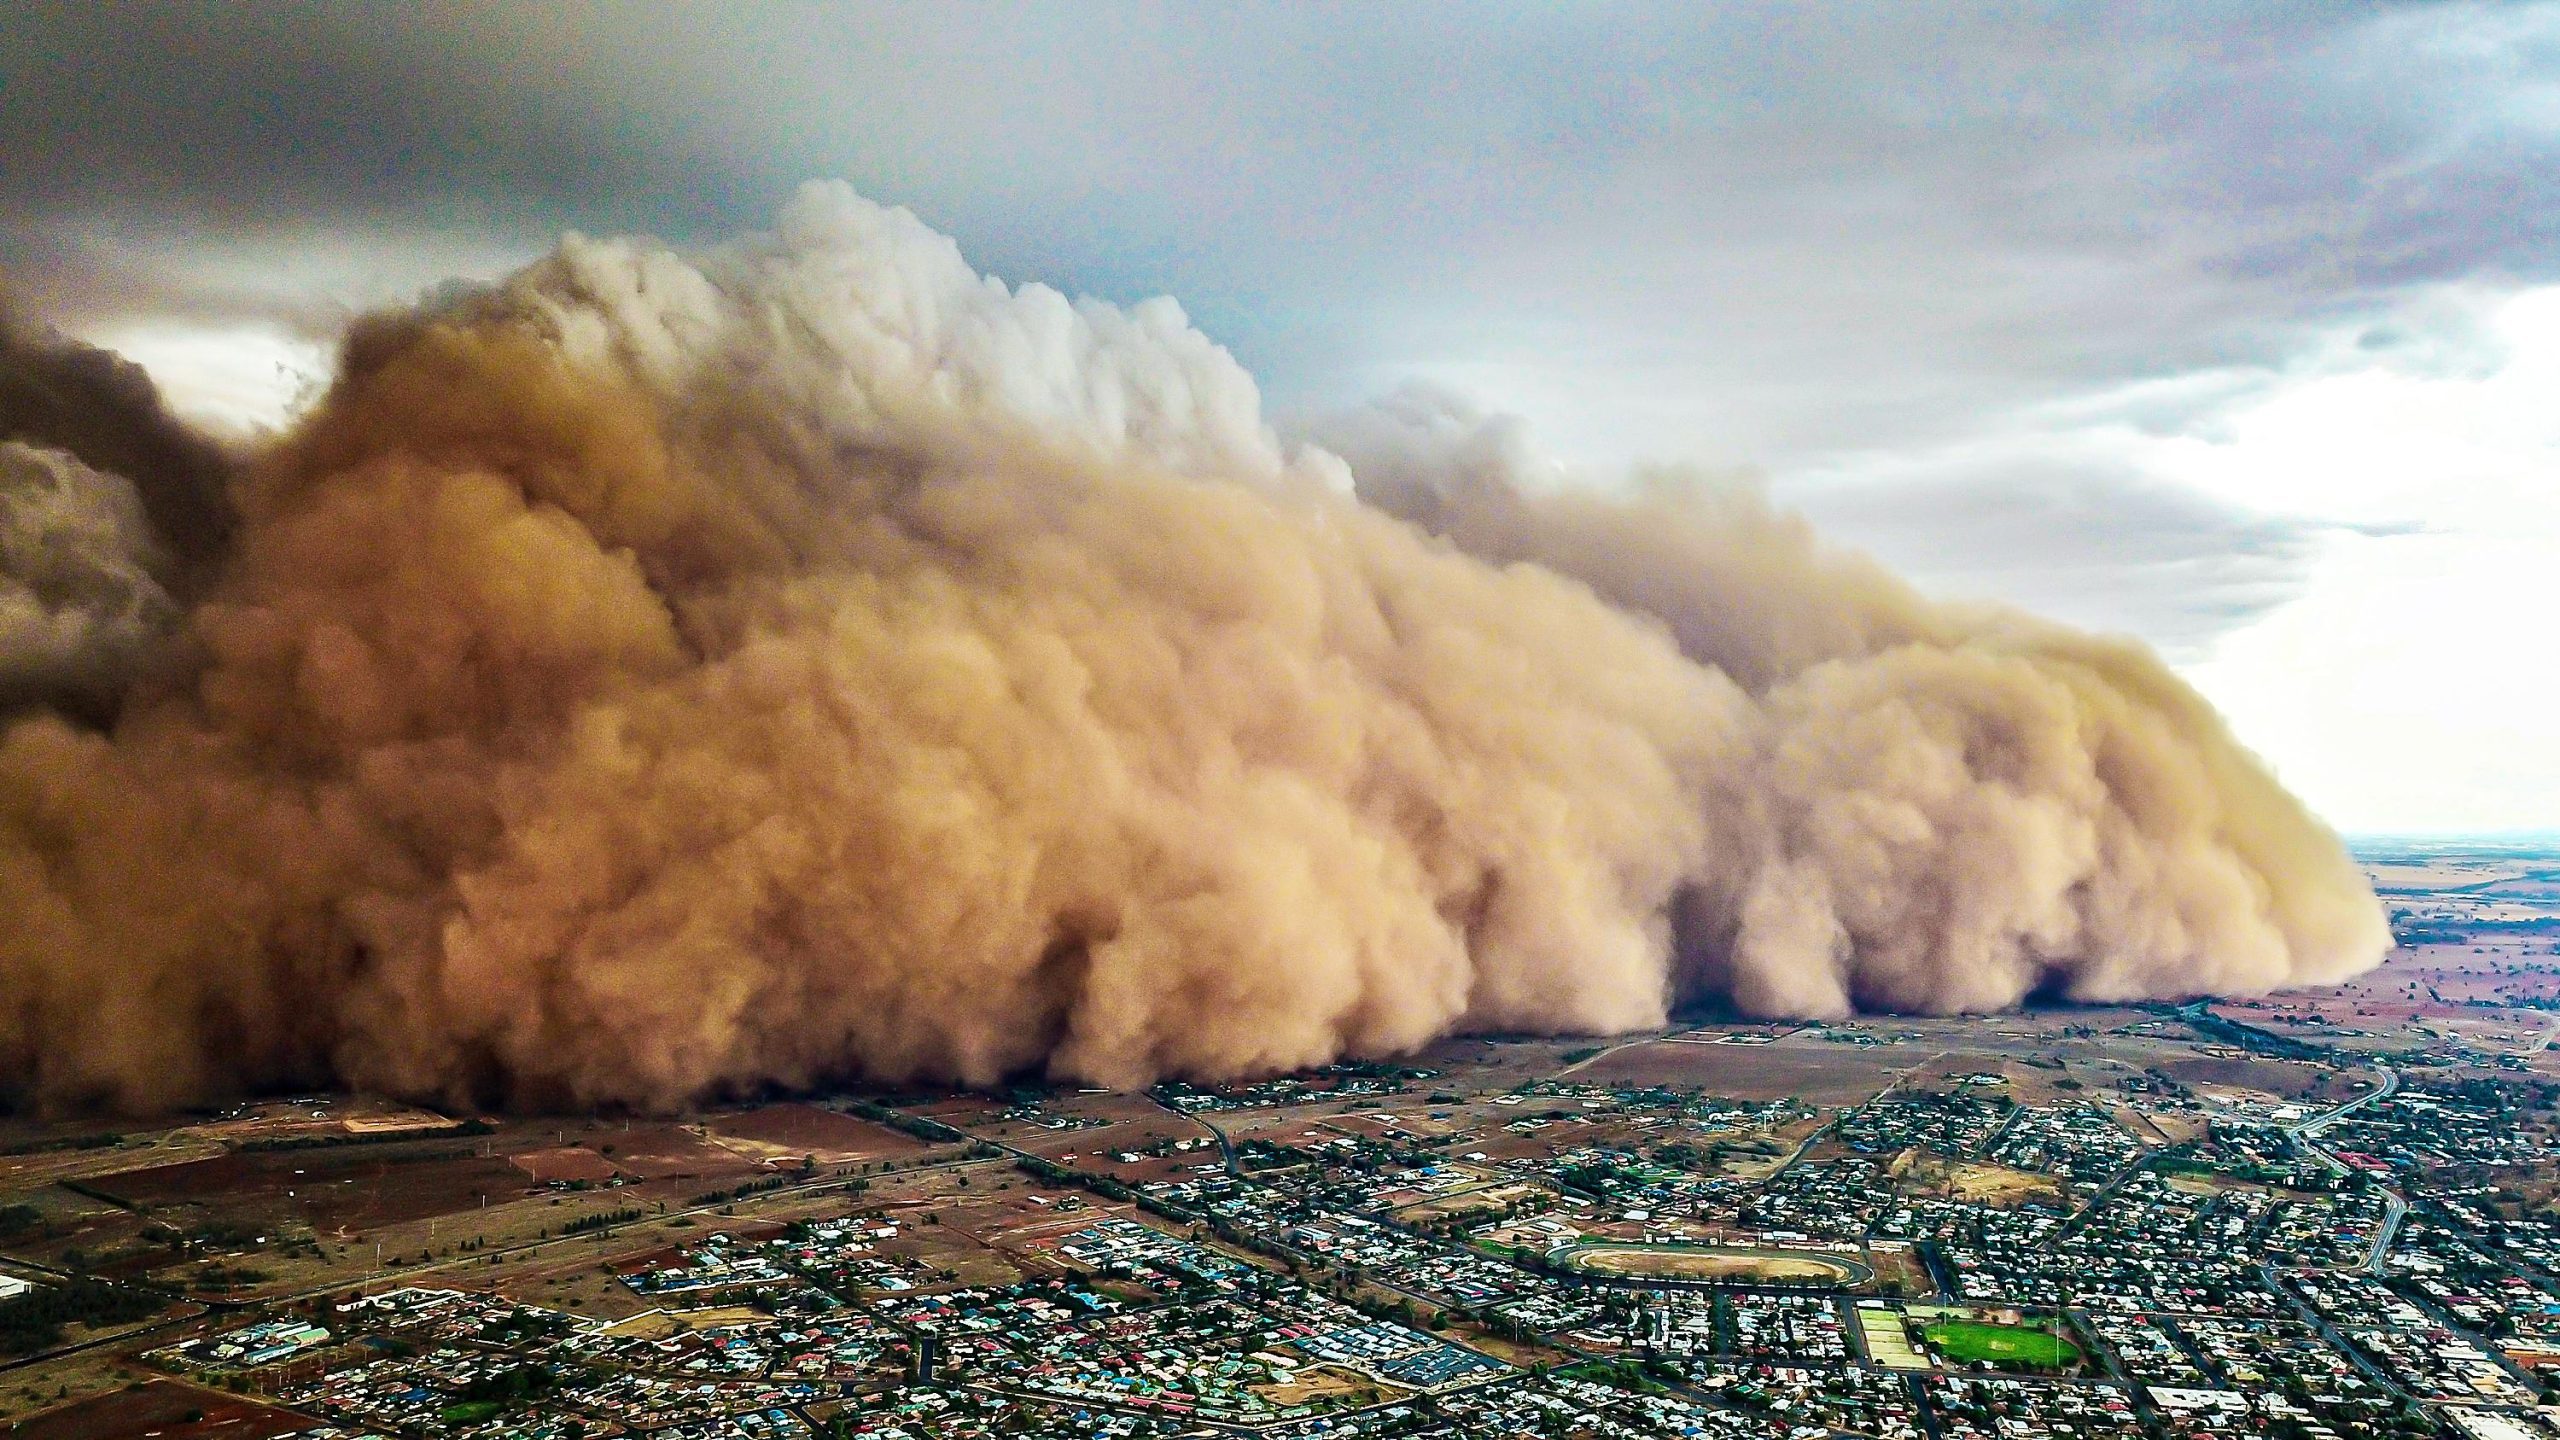 Giant dust storm engulfs Australian town during overcast day